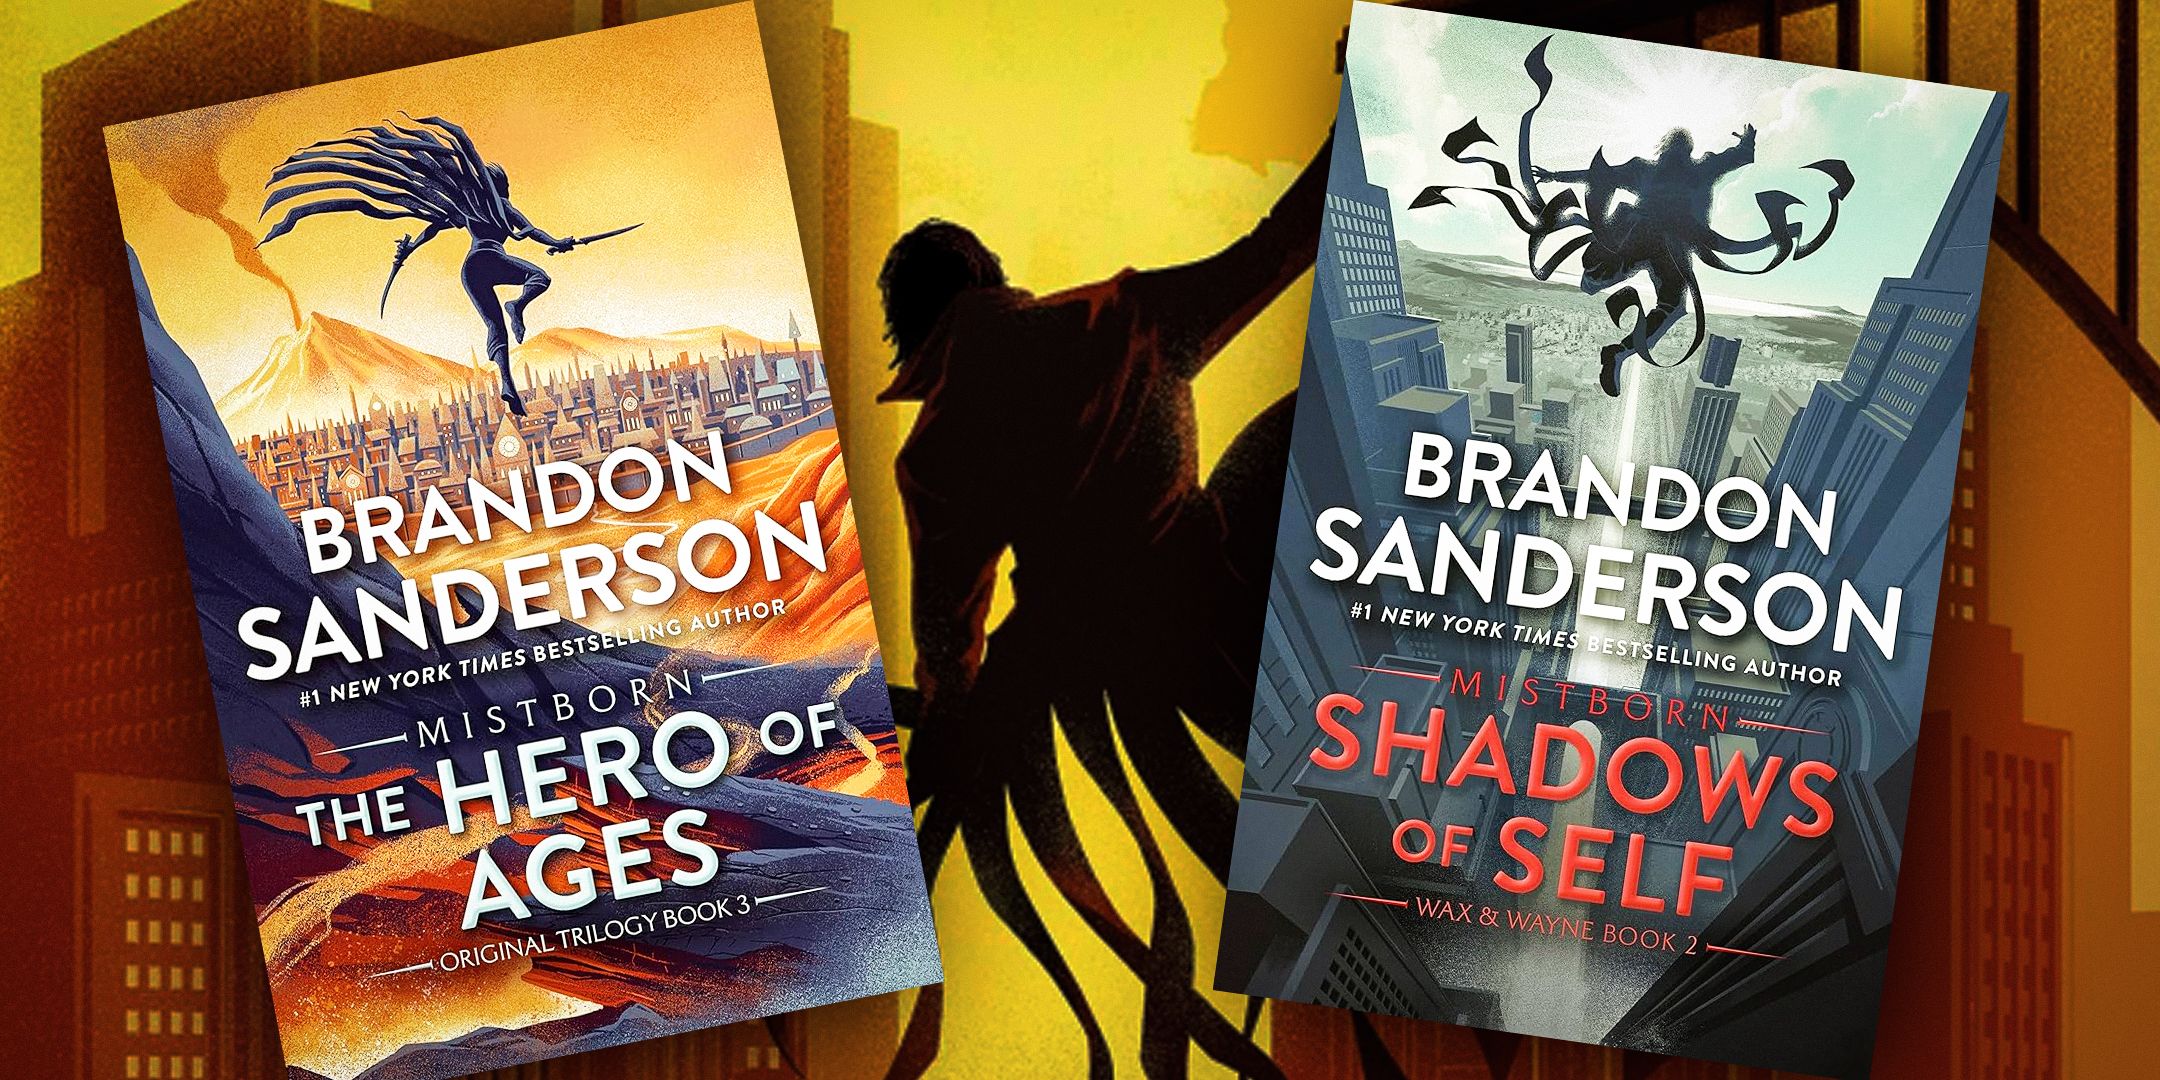 Mistborn book covers